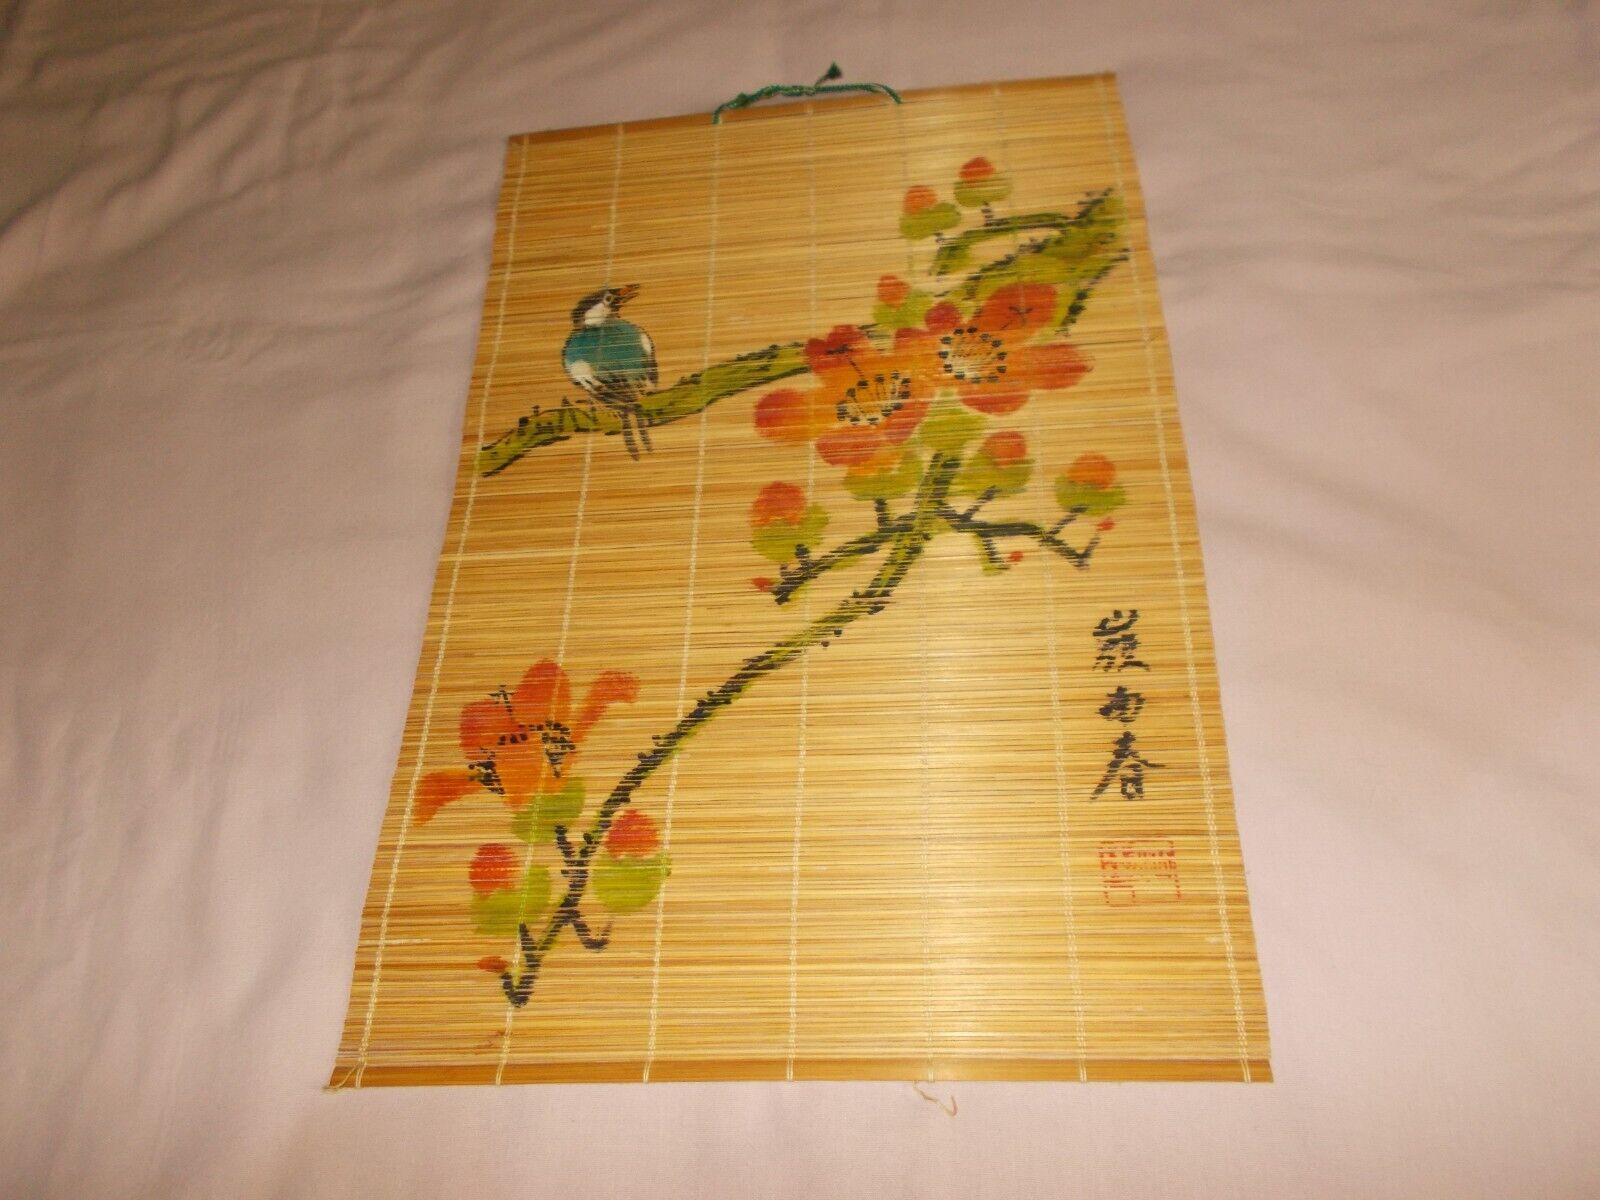 Bamboo Wall Hanging Flowers Blue Bird Painted Chinese Asian